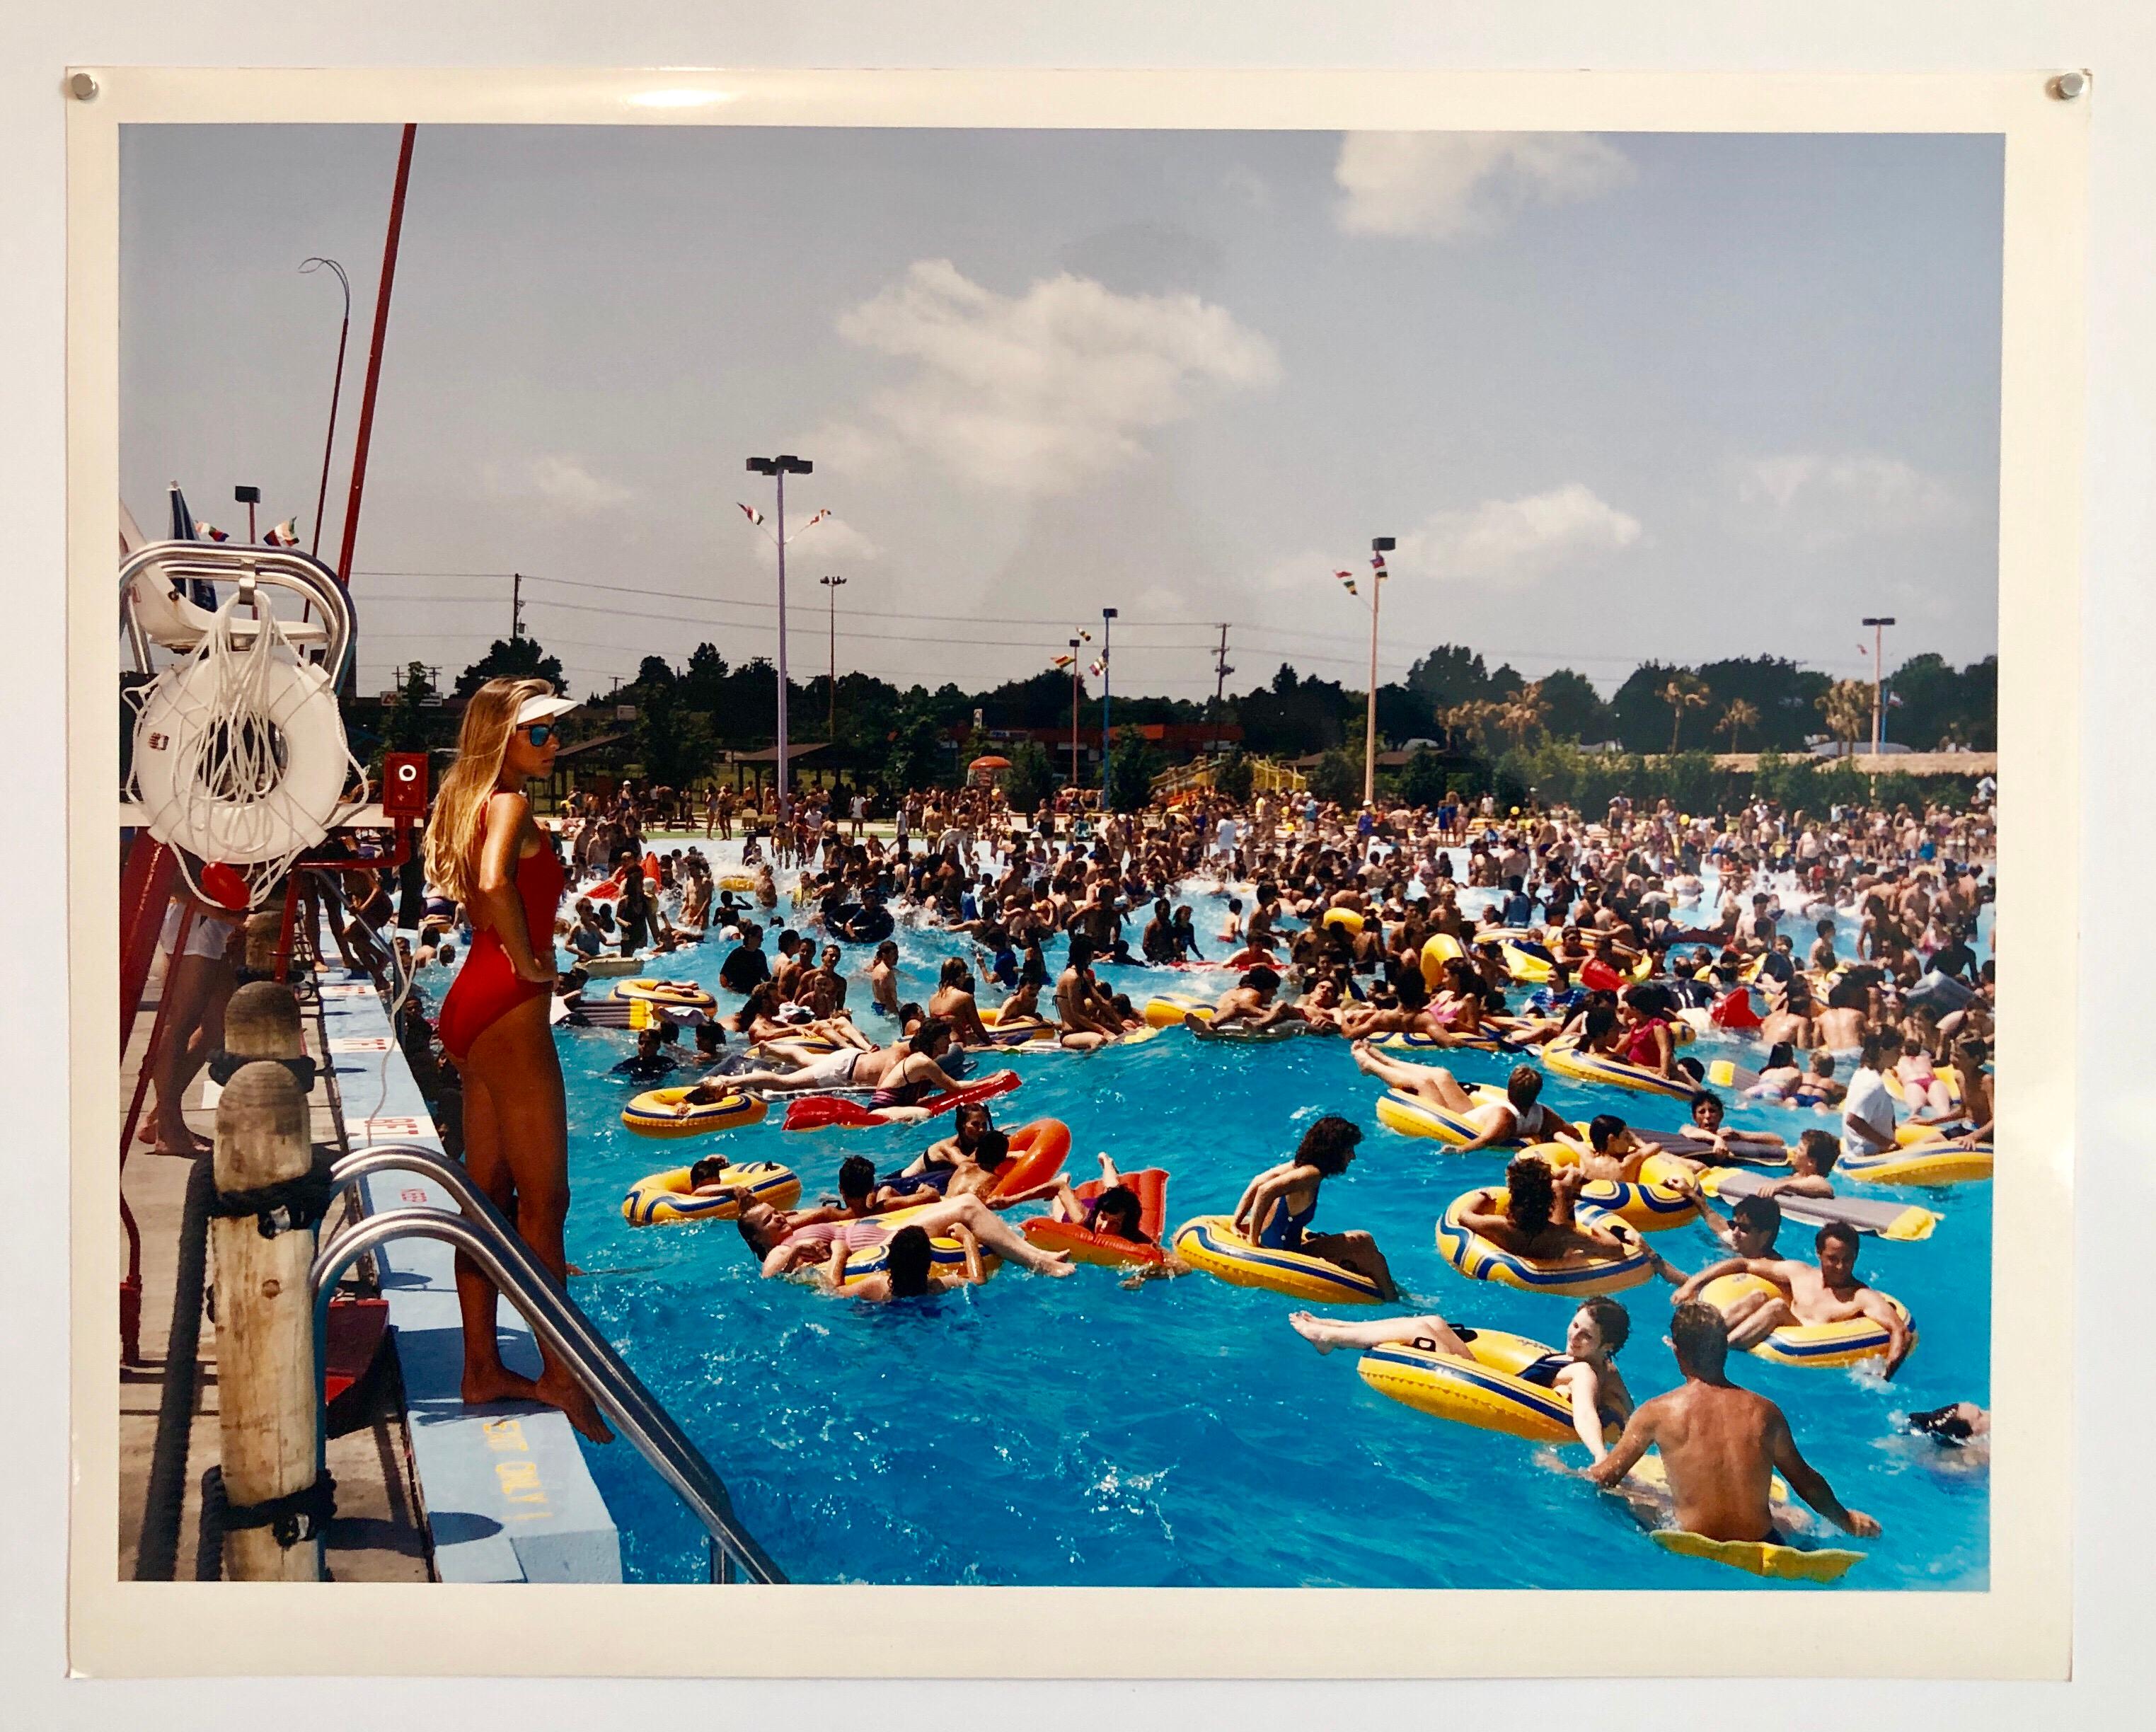 Crowded Swimming Pool Signed Vintage Color Photograph Chicago Photo Jay Wolke 2